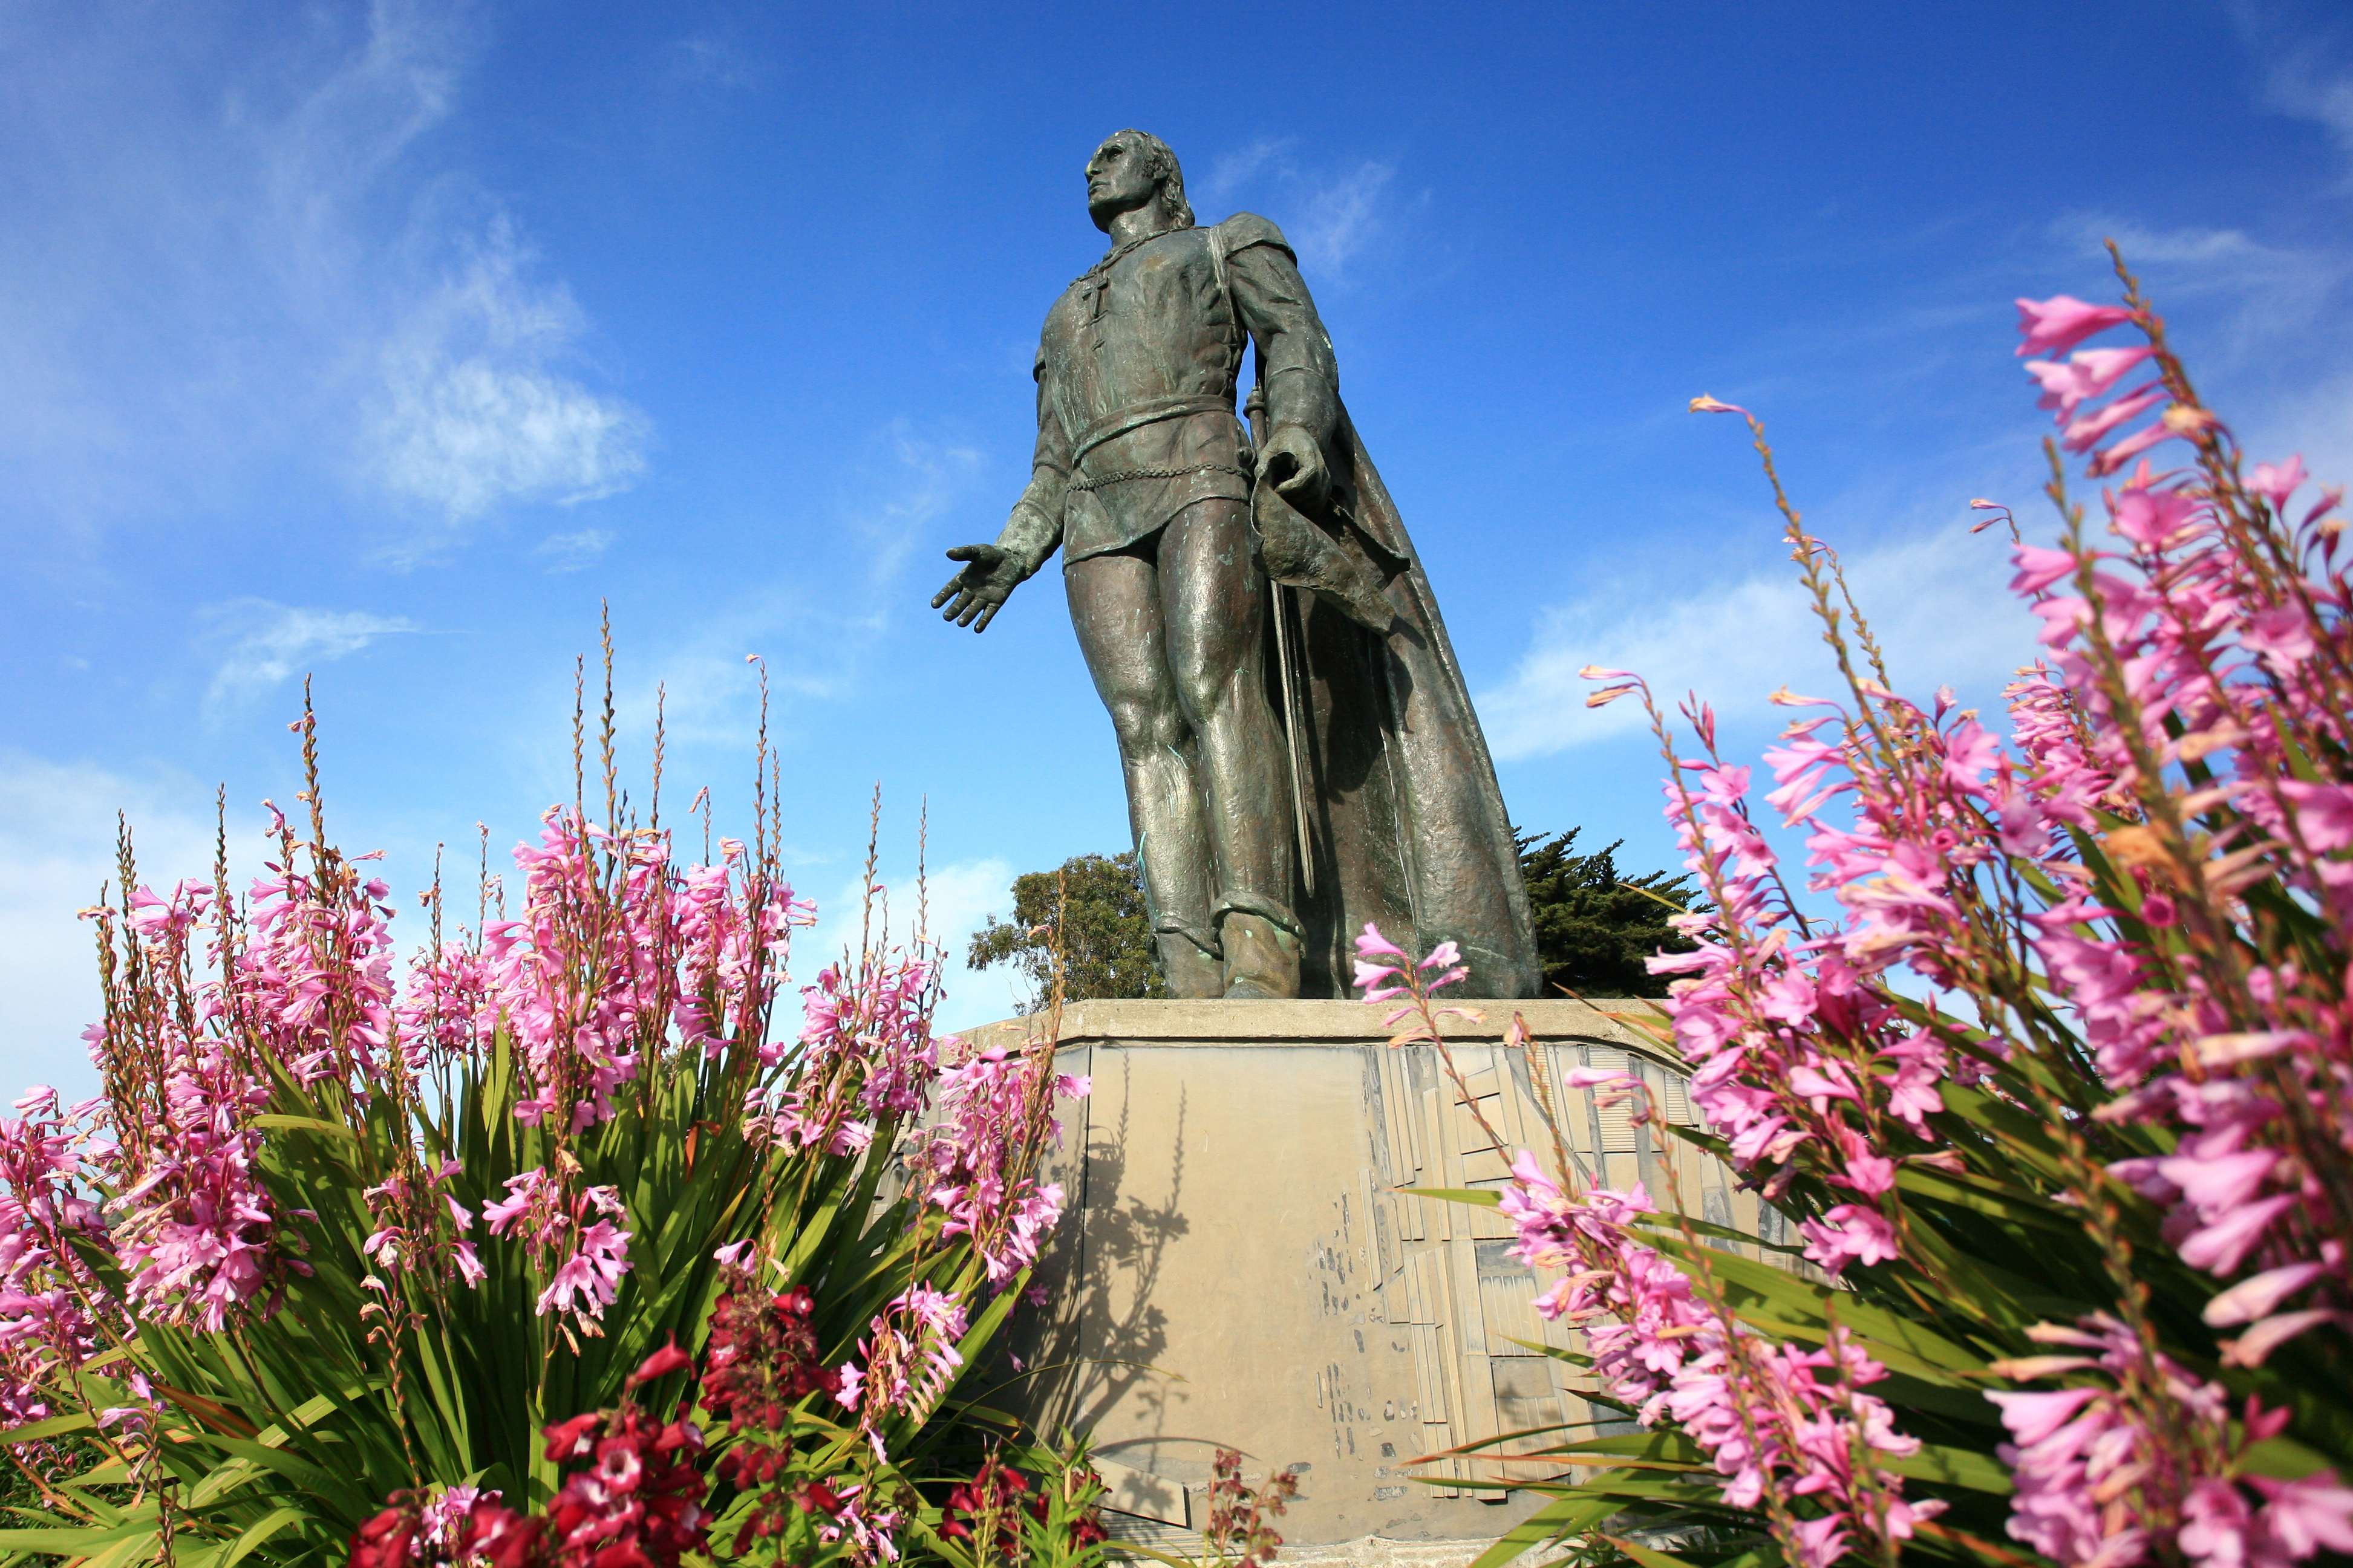 A low-angle photo of the Columbus Statue next to Coit Tower with a blue sky in the background.